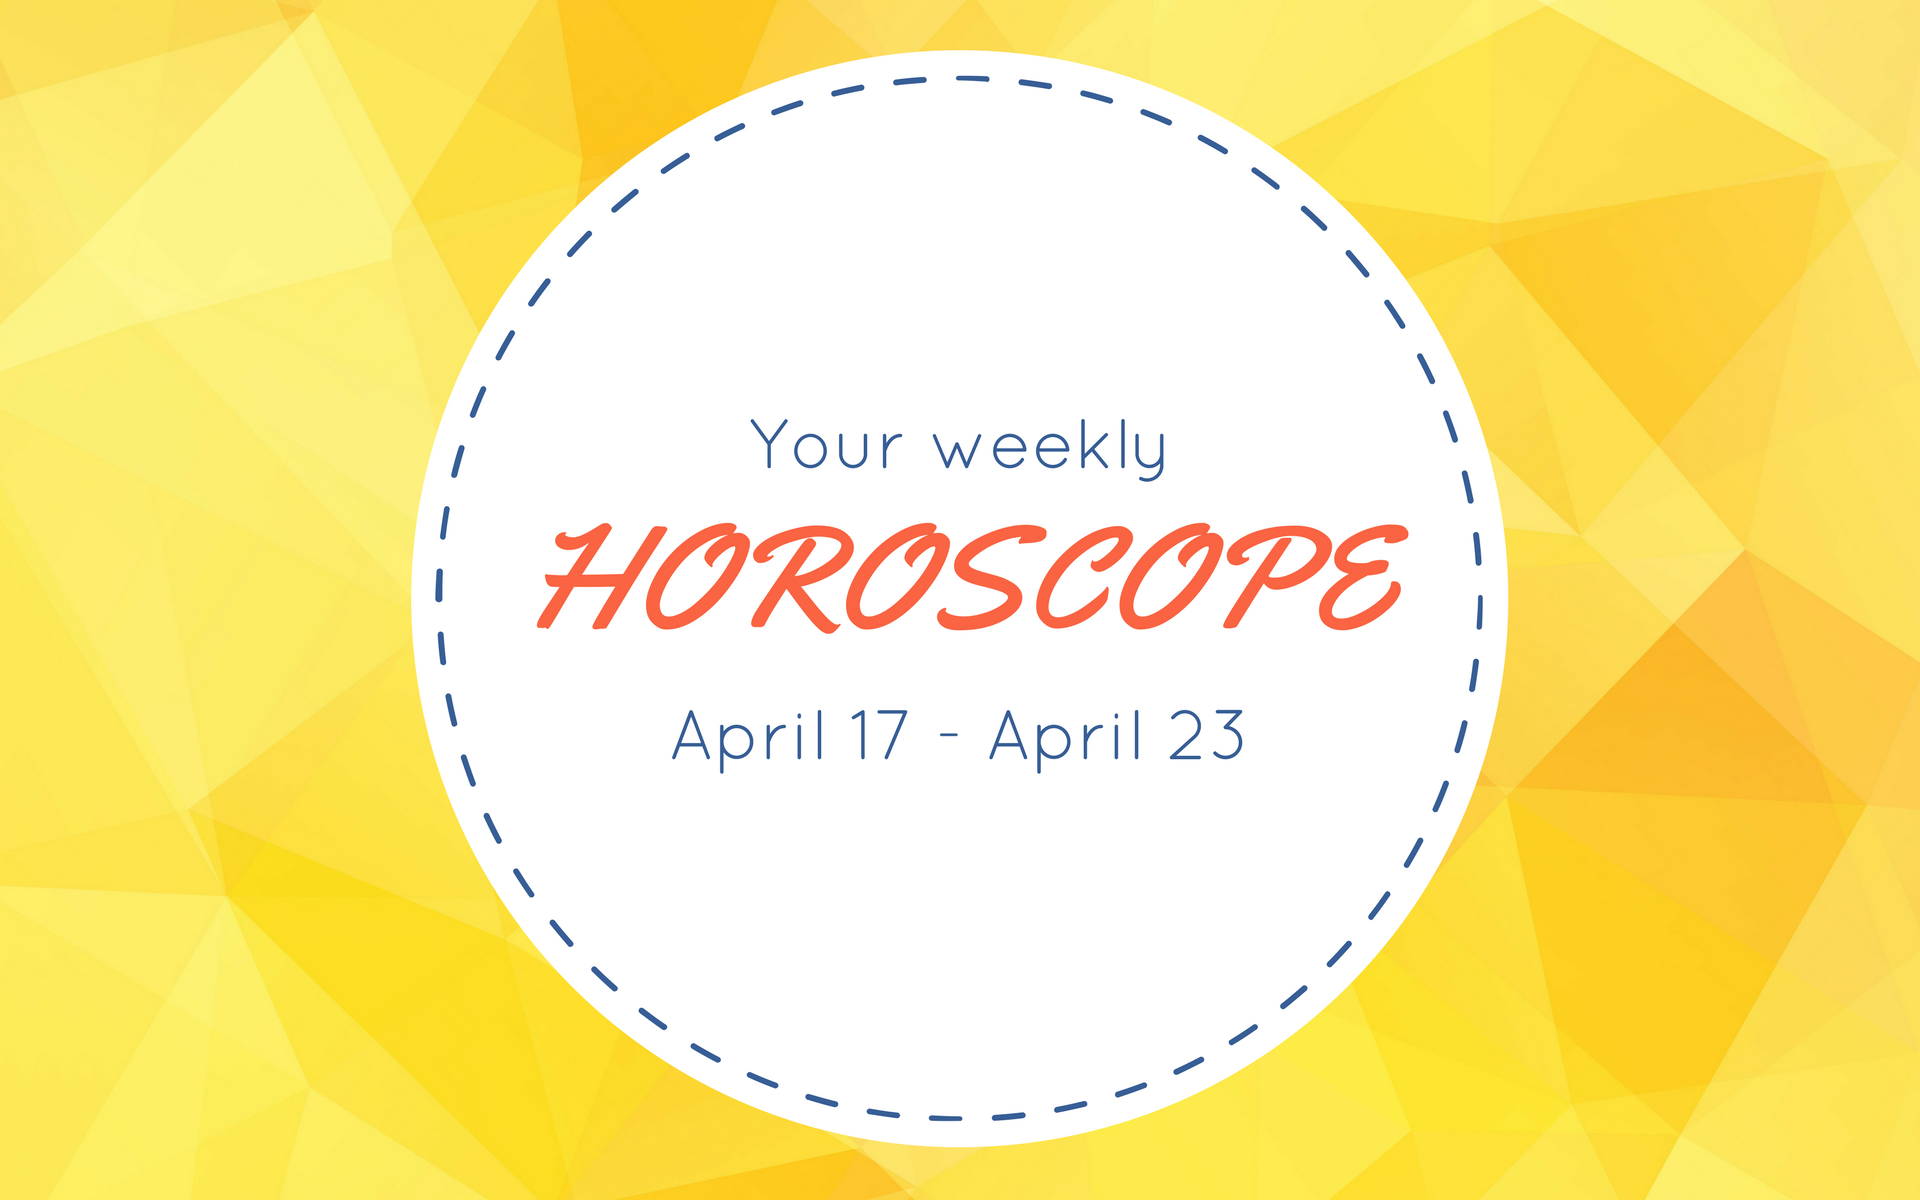 Your Weekly Horoscope: April 17 - April 23